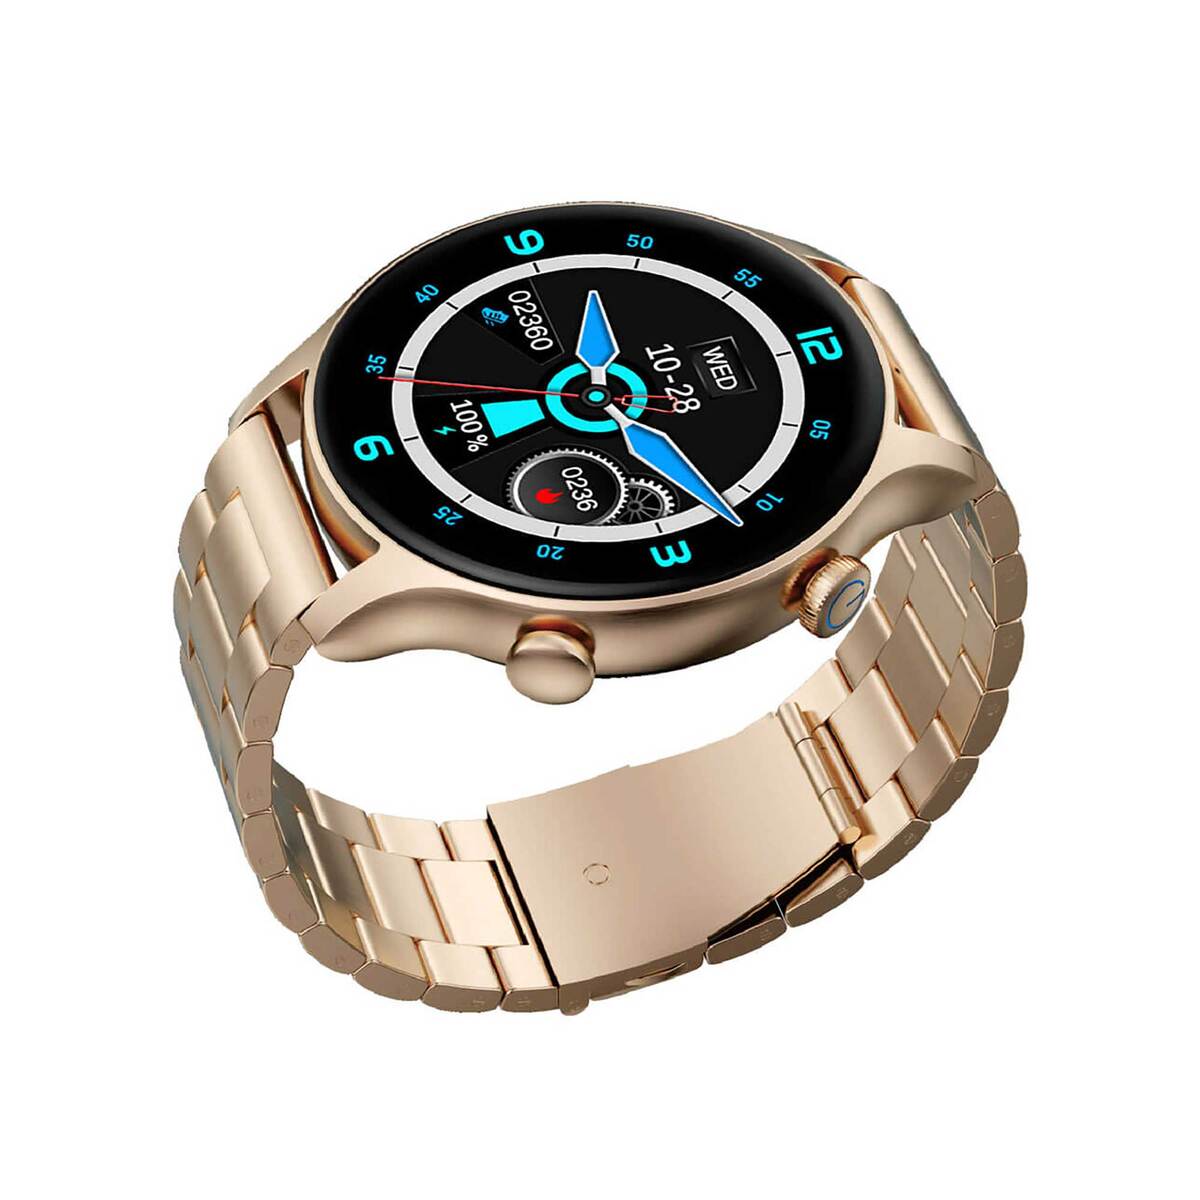 G-Tab 1.39 inches GT6 Full Touch Display Deluxe Smartwatch, Gold